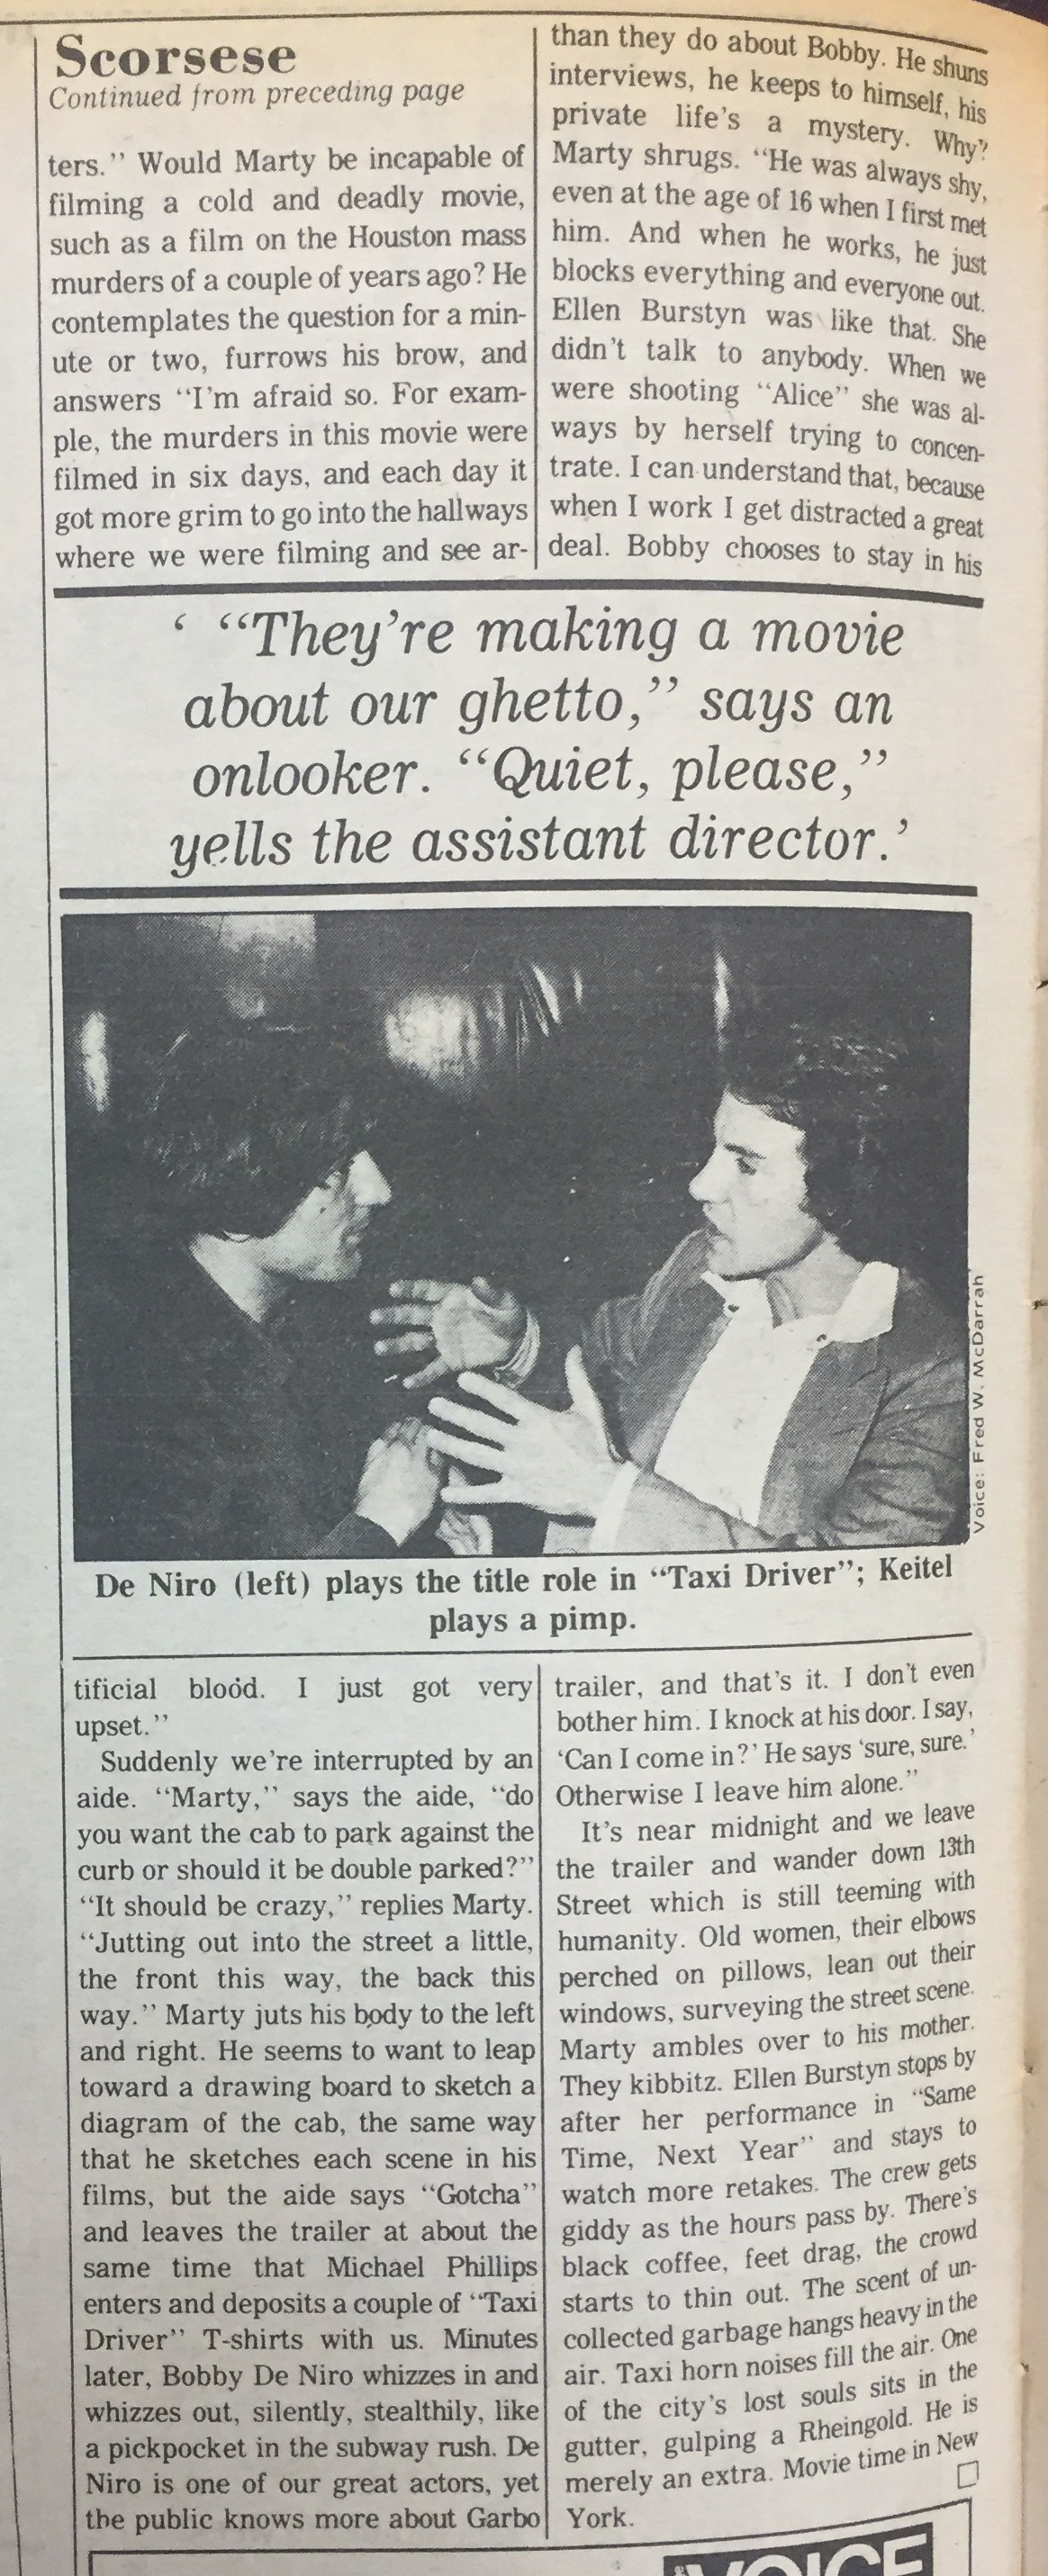 1975 Village Voice article about Taxi Driver filming